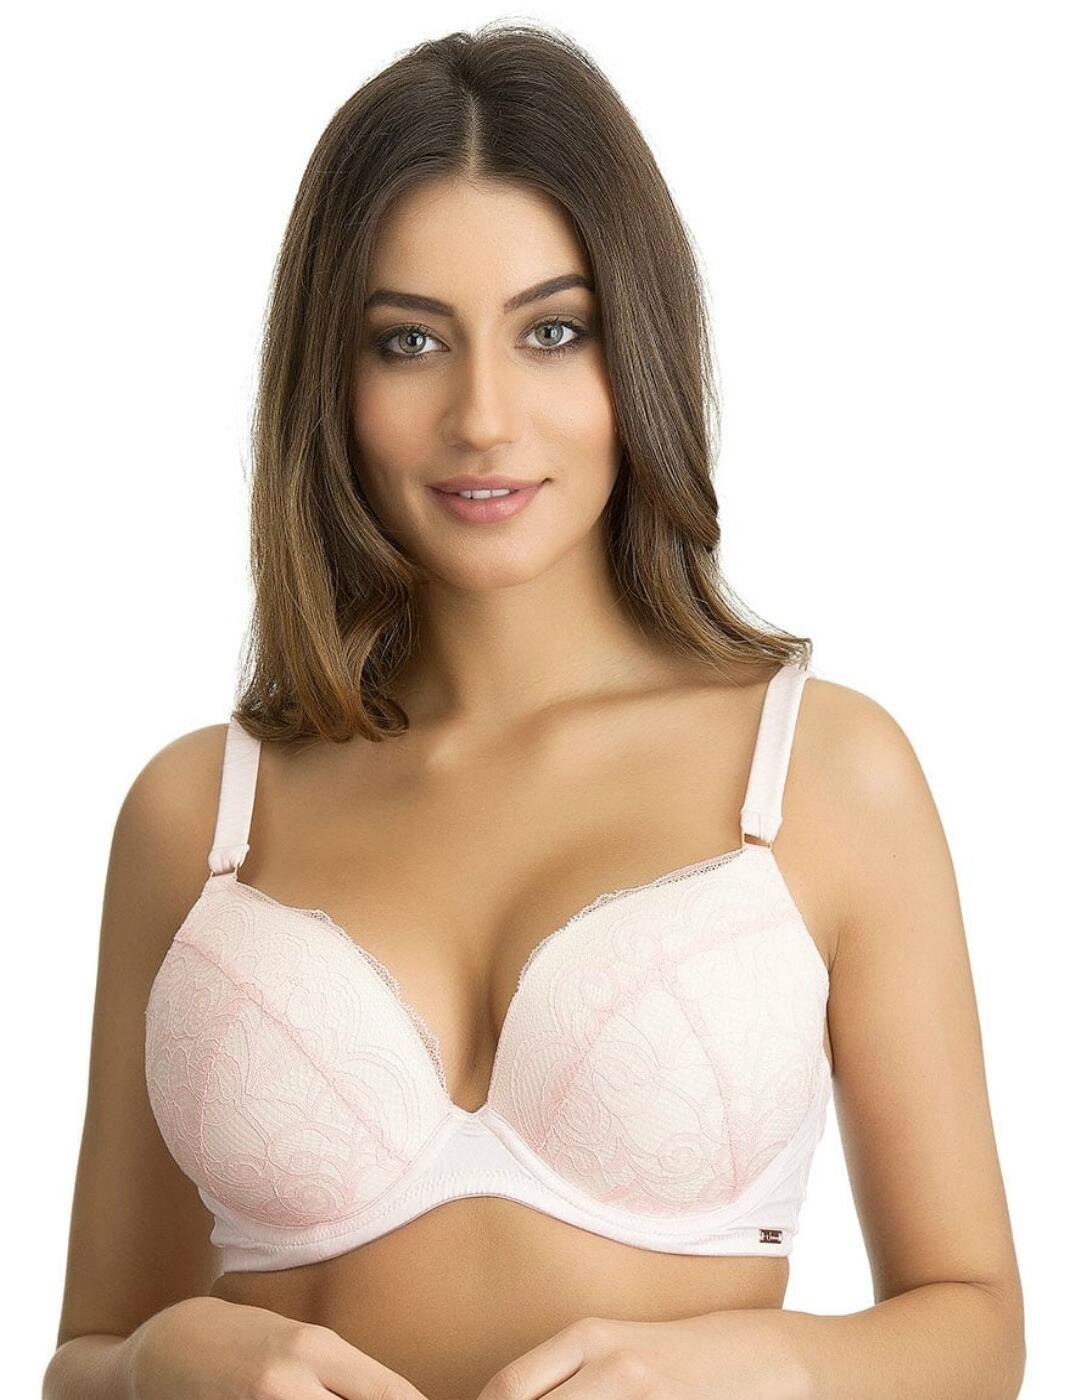 356705 Ultimo Paulina Underwired Moulded Padded Fuller Bust Plunge - 356705 Pink Icing